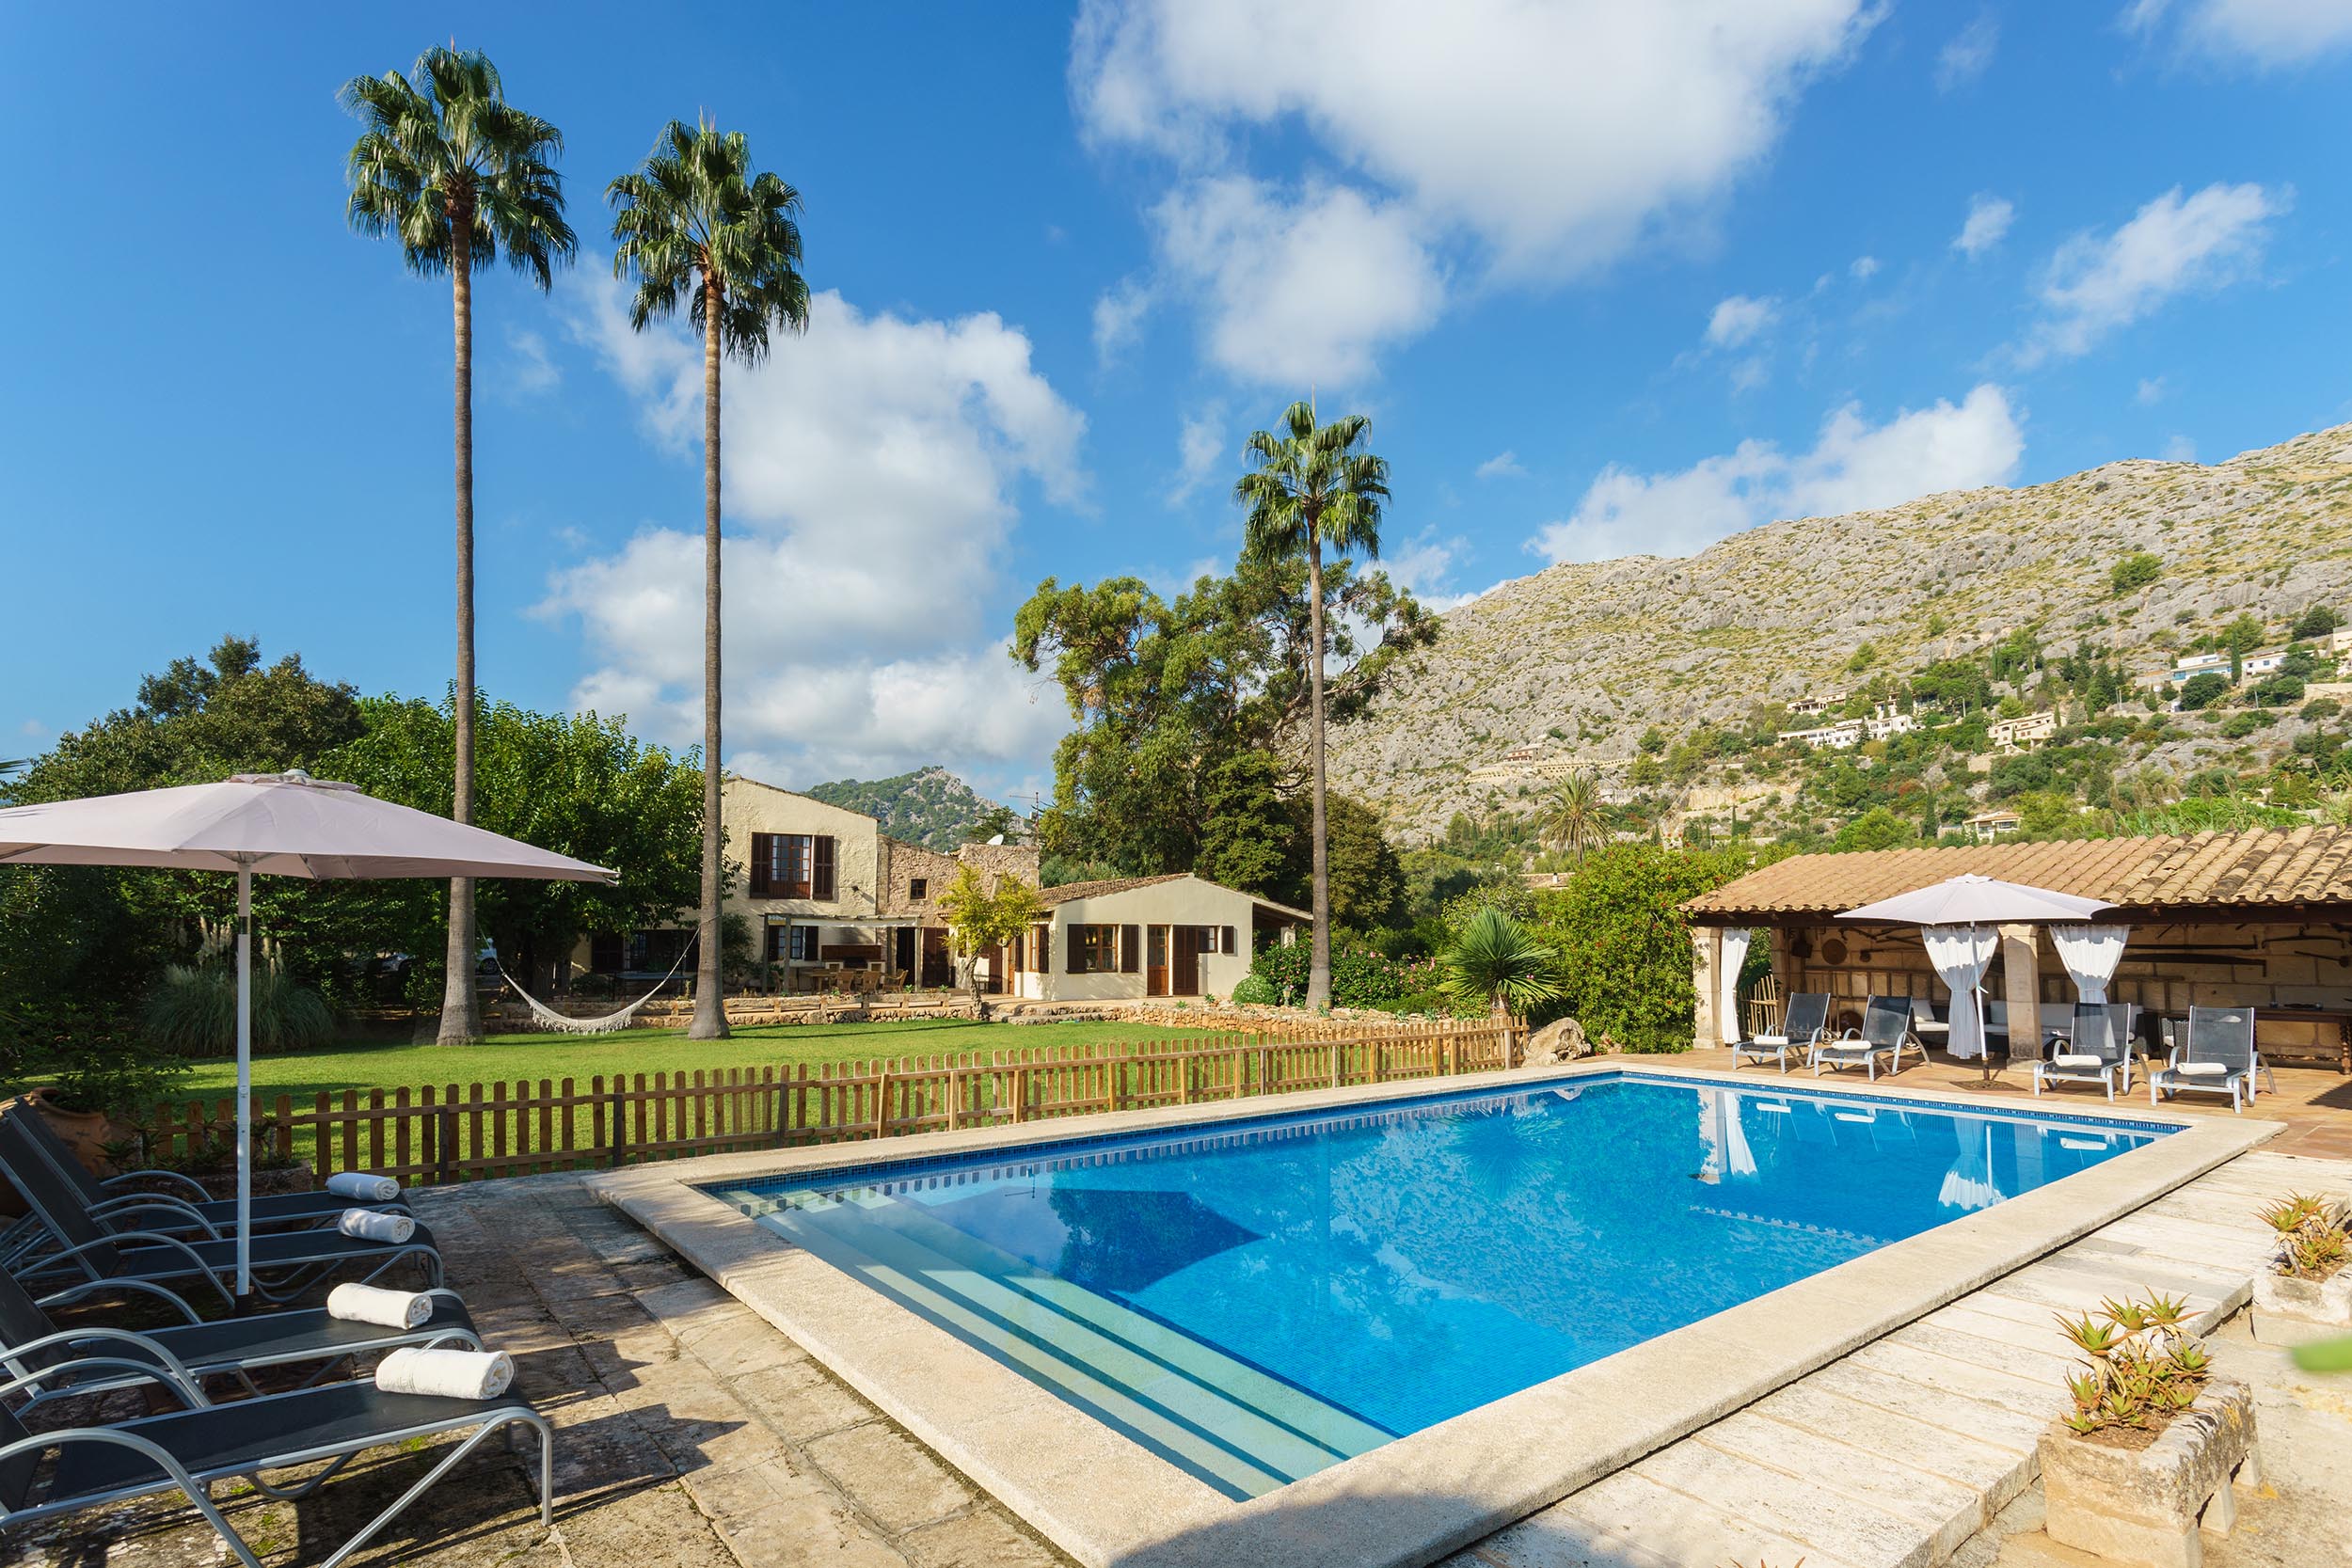 Can Gat is a nice country villa in Pollensa